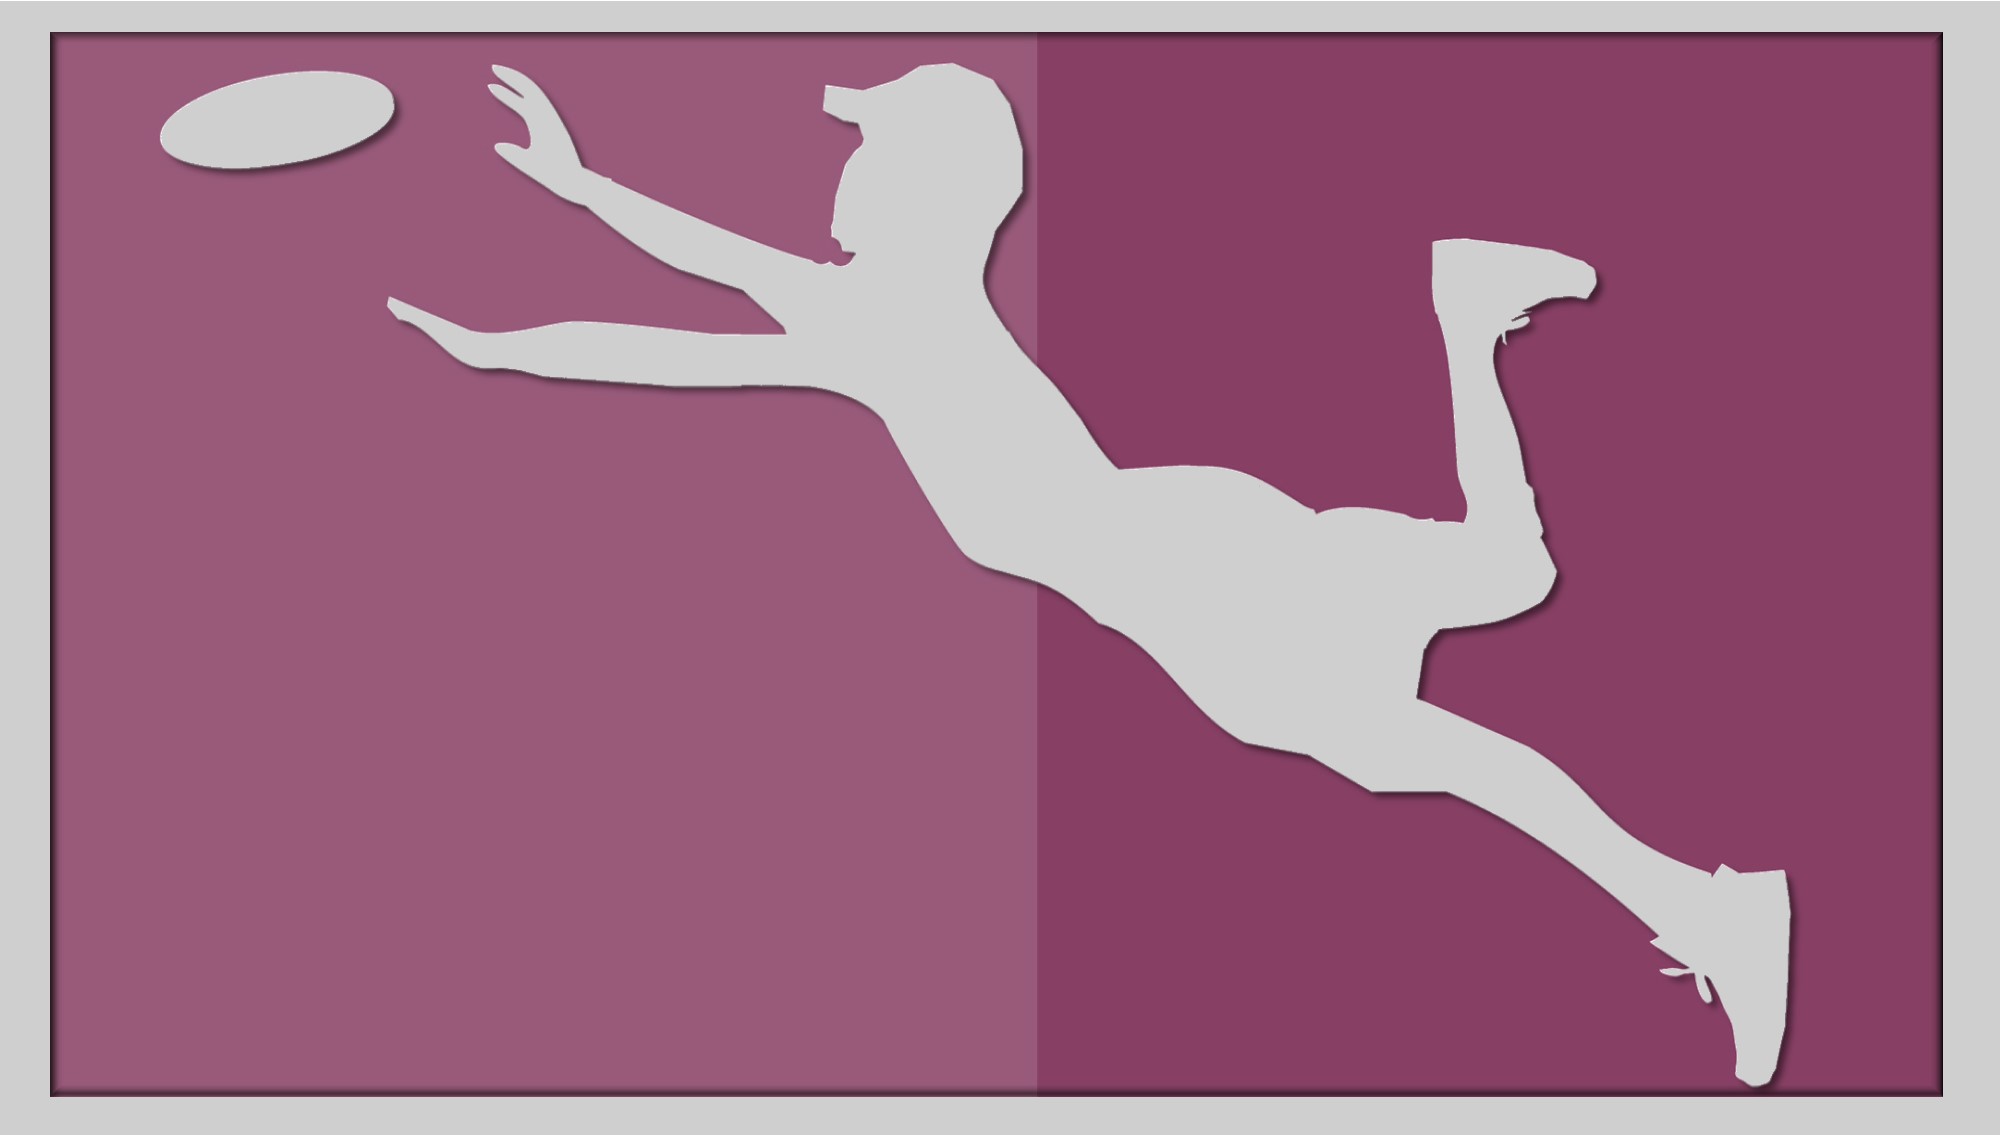 person outstretched in a jump to catch a flying disc, gray silhouette against purple and lavender background.